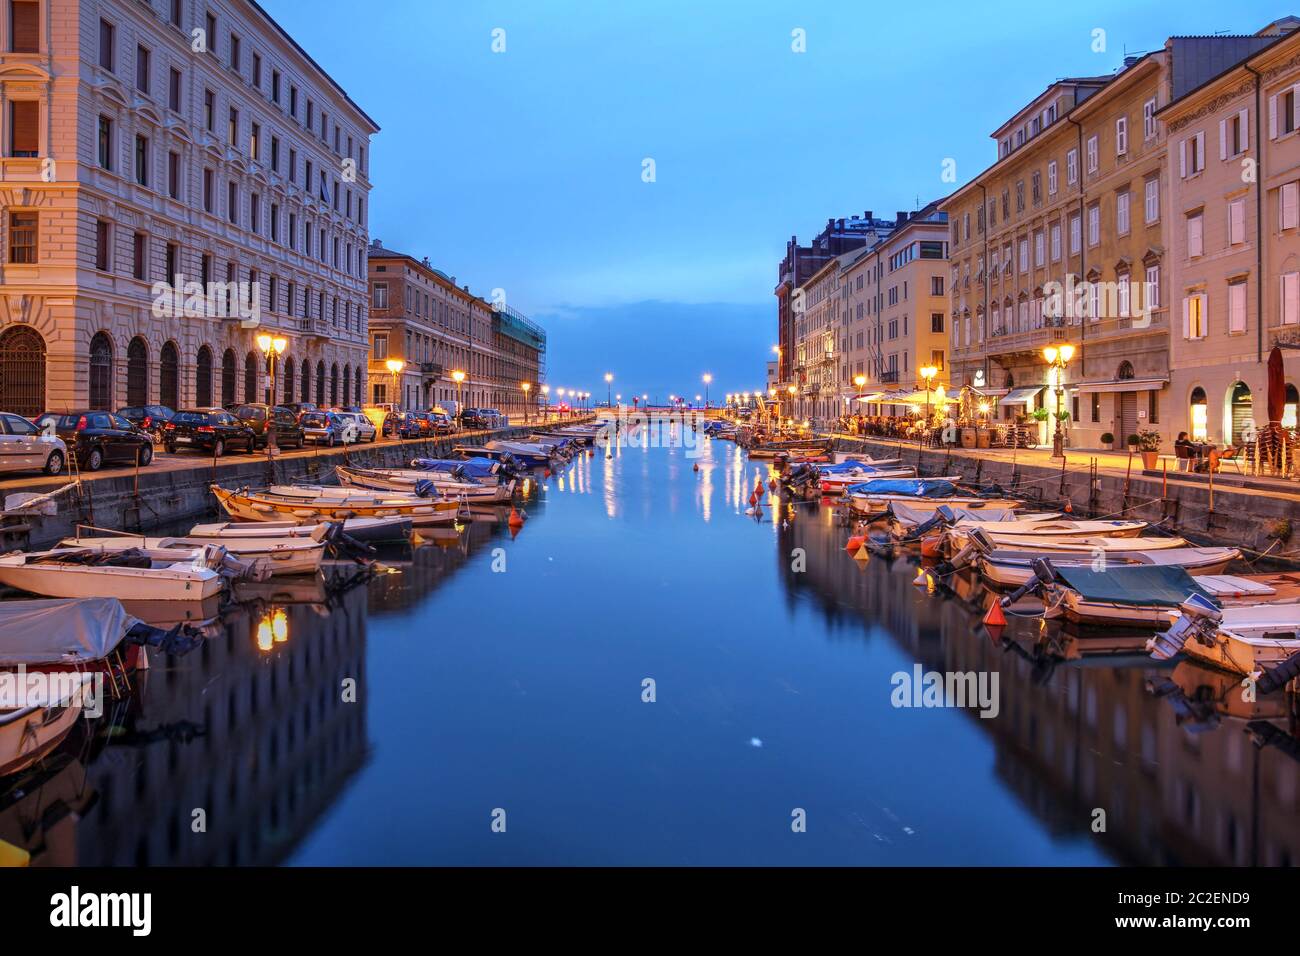 Scenic view of the Canal Grande in Trieste, Italy at night. Stock Photo